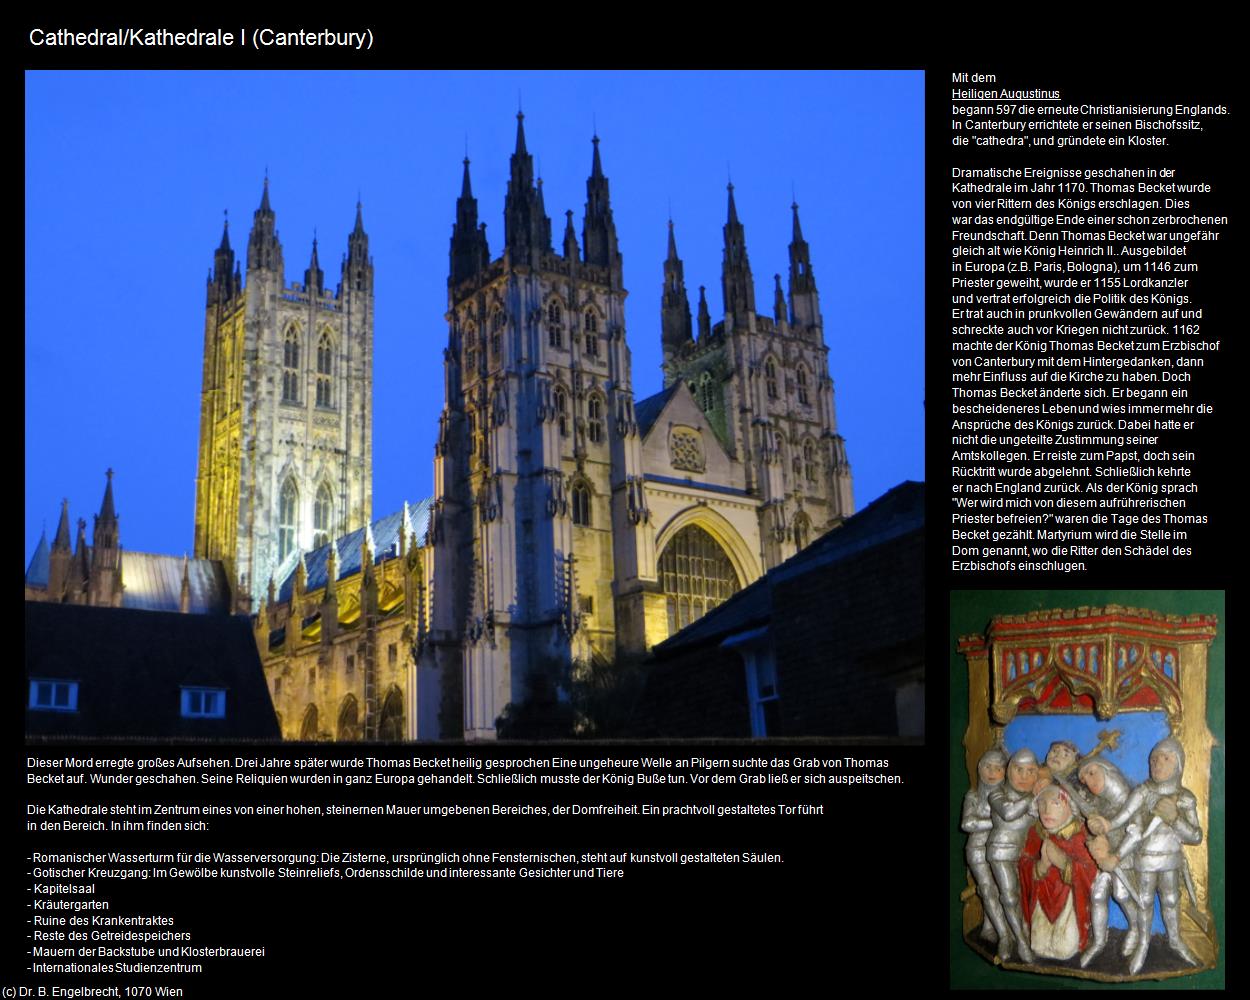 Cathedral/Kathedrale I (Canterbury, England) in Kulturatlas-ENGLAND und WALES(c)B.Engelbrecht